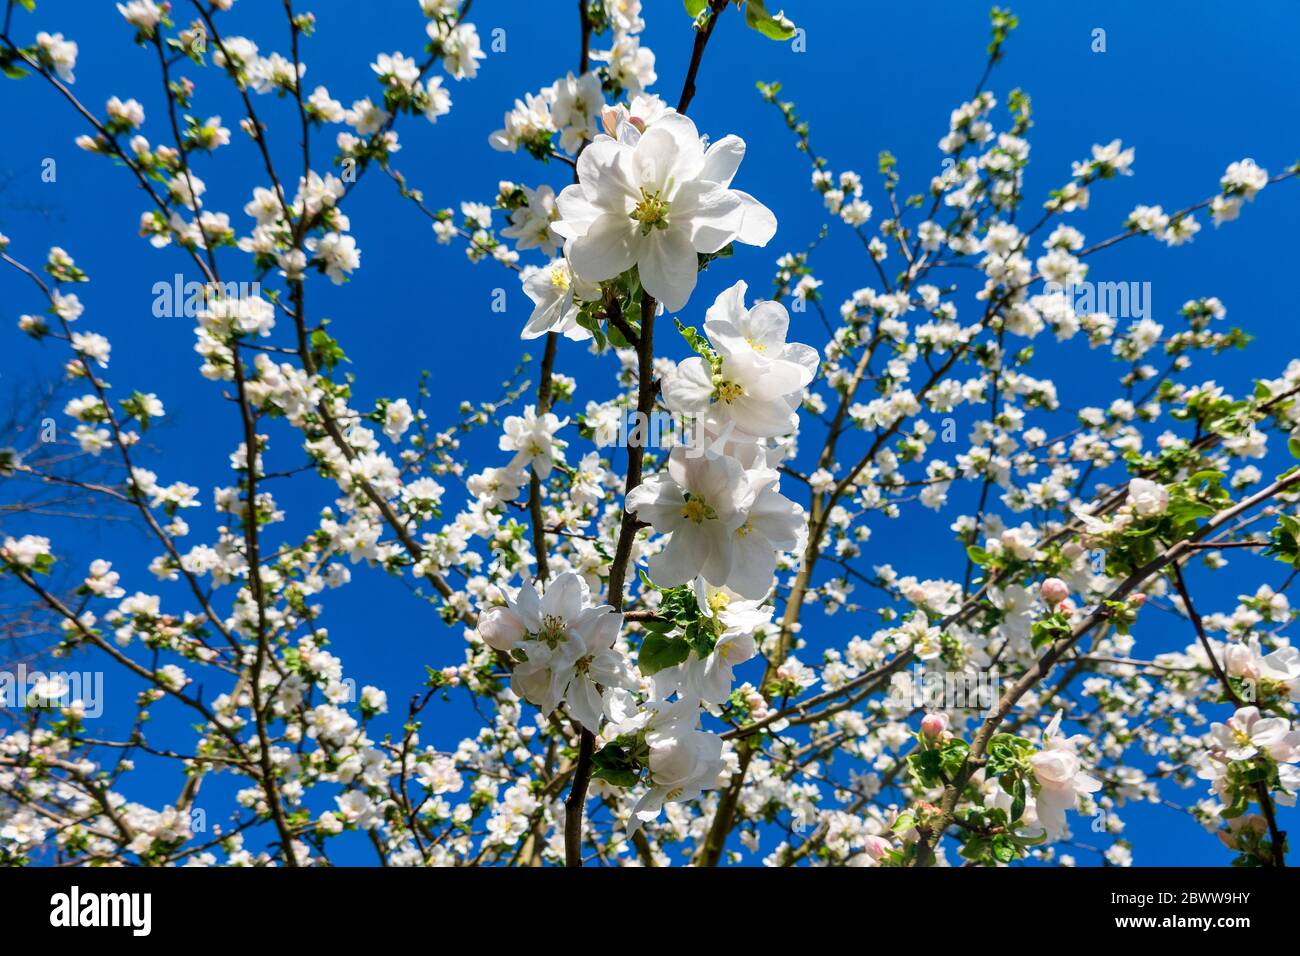 Germany, Branches of blossoming apple tree Stock Photo